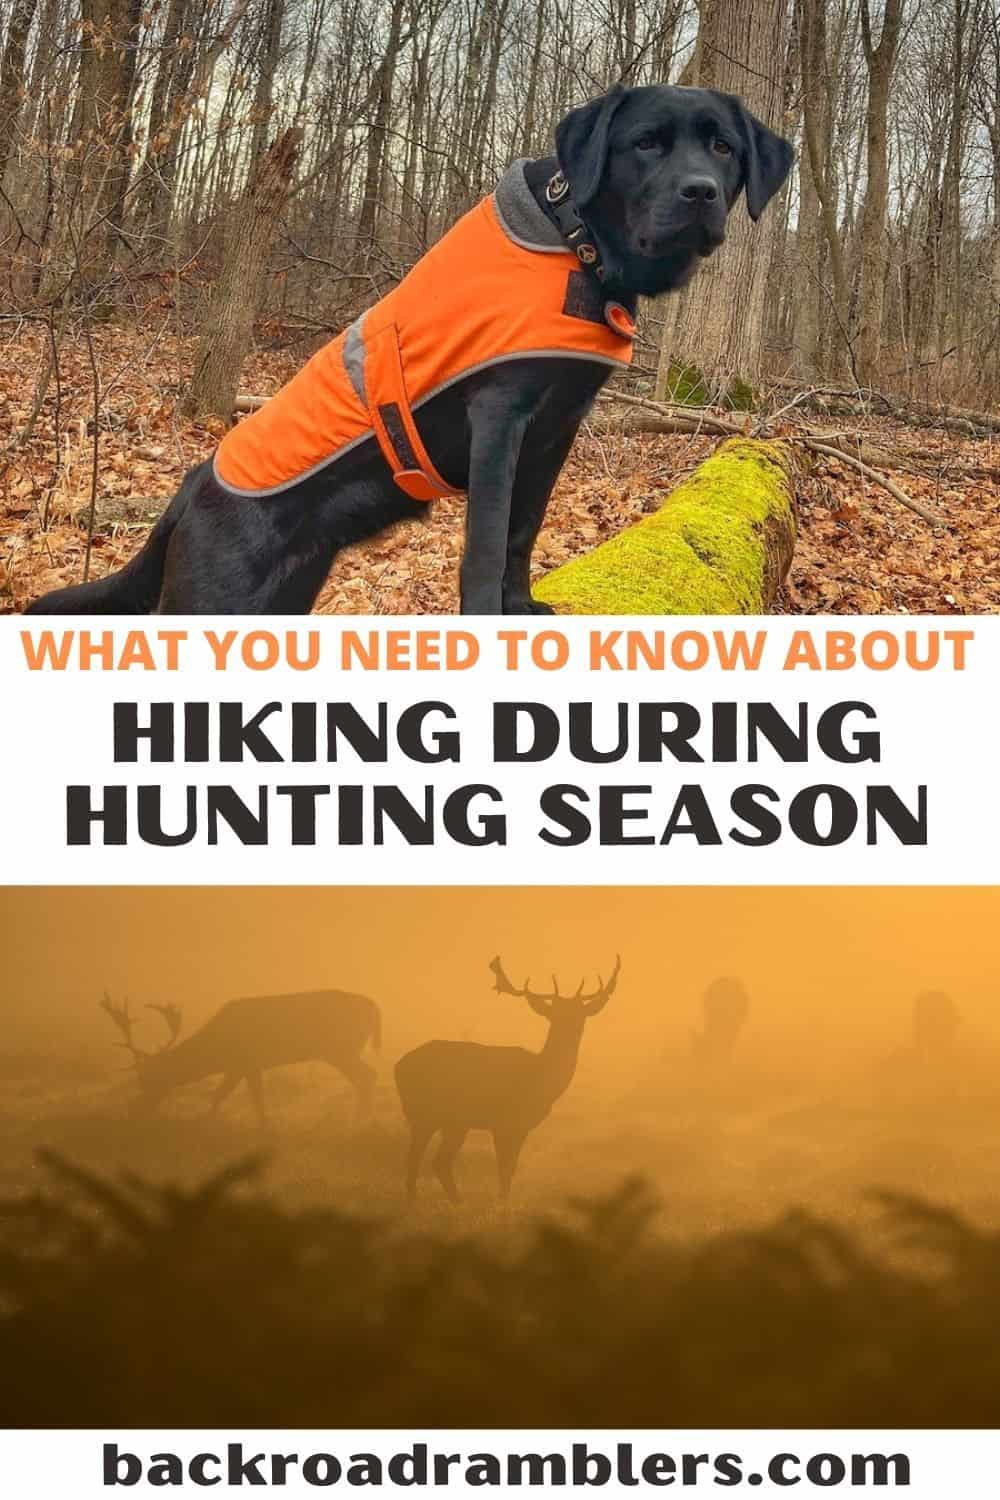 A collage of photos - one is of a black lab wearing an orange vest. The other is of several deer in a field during the sunset. Text overlay - What you need to know about hiking during hunting season.